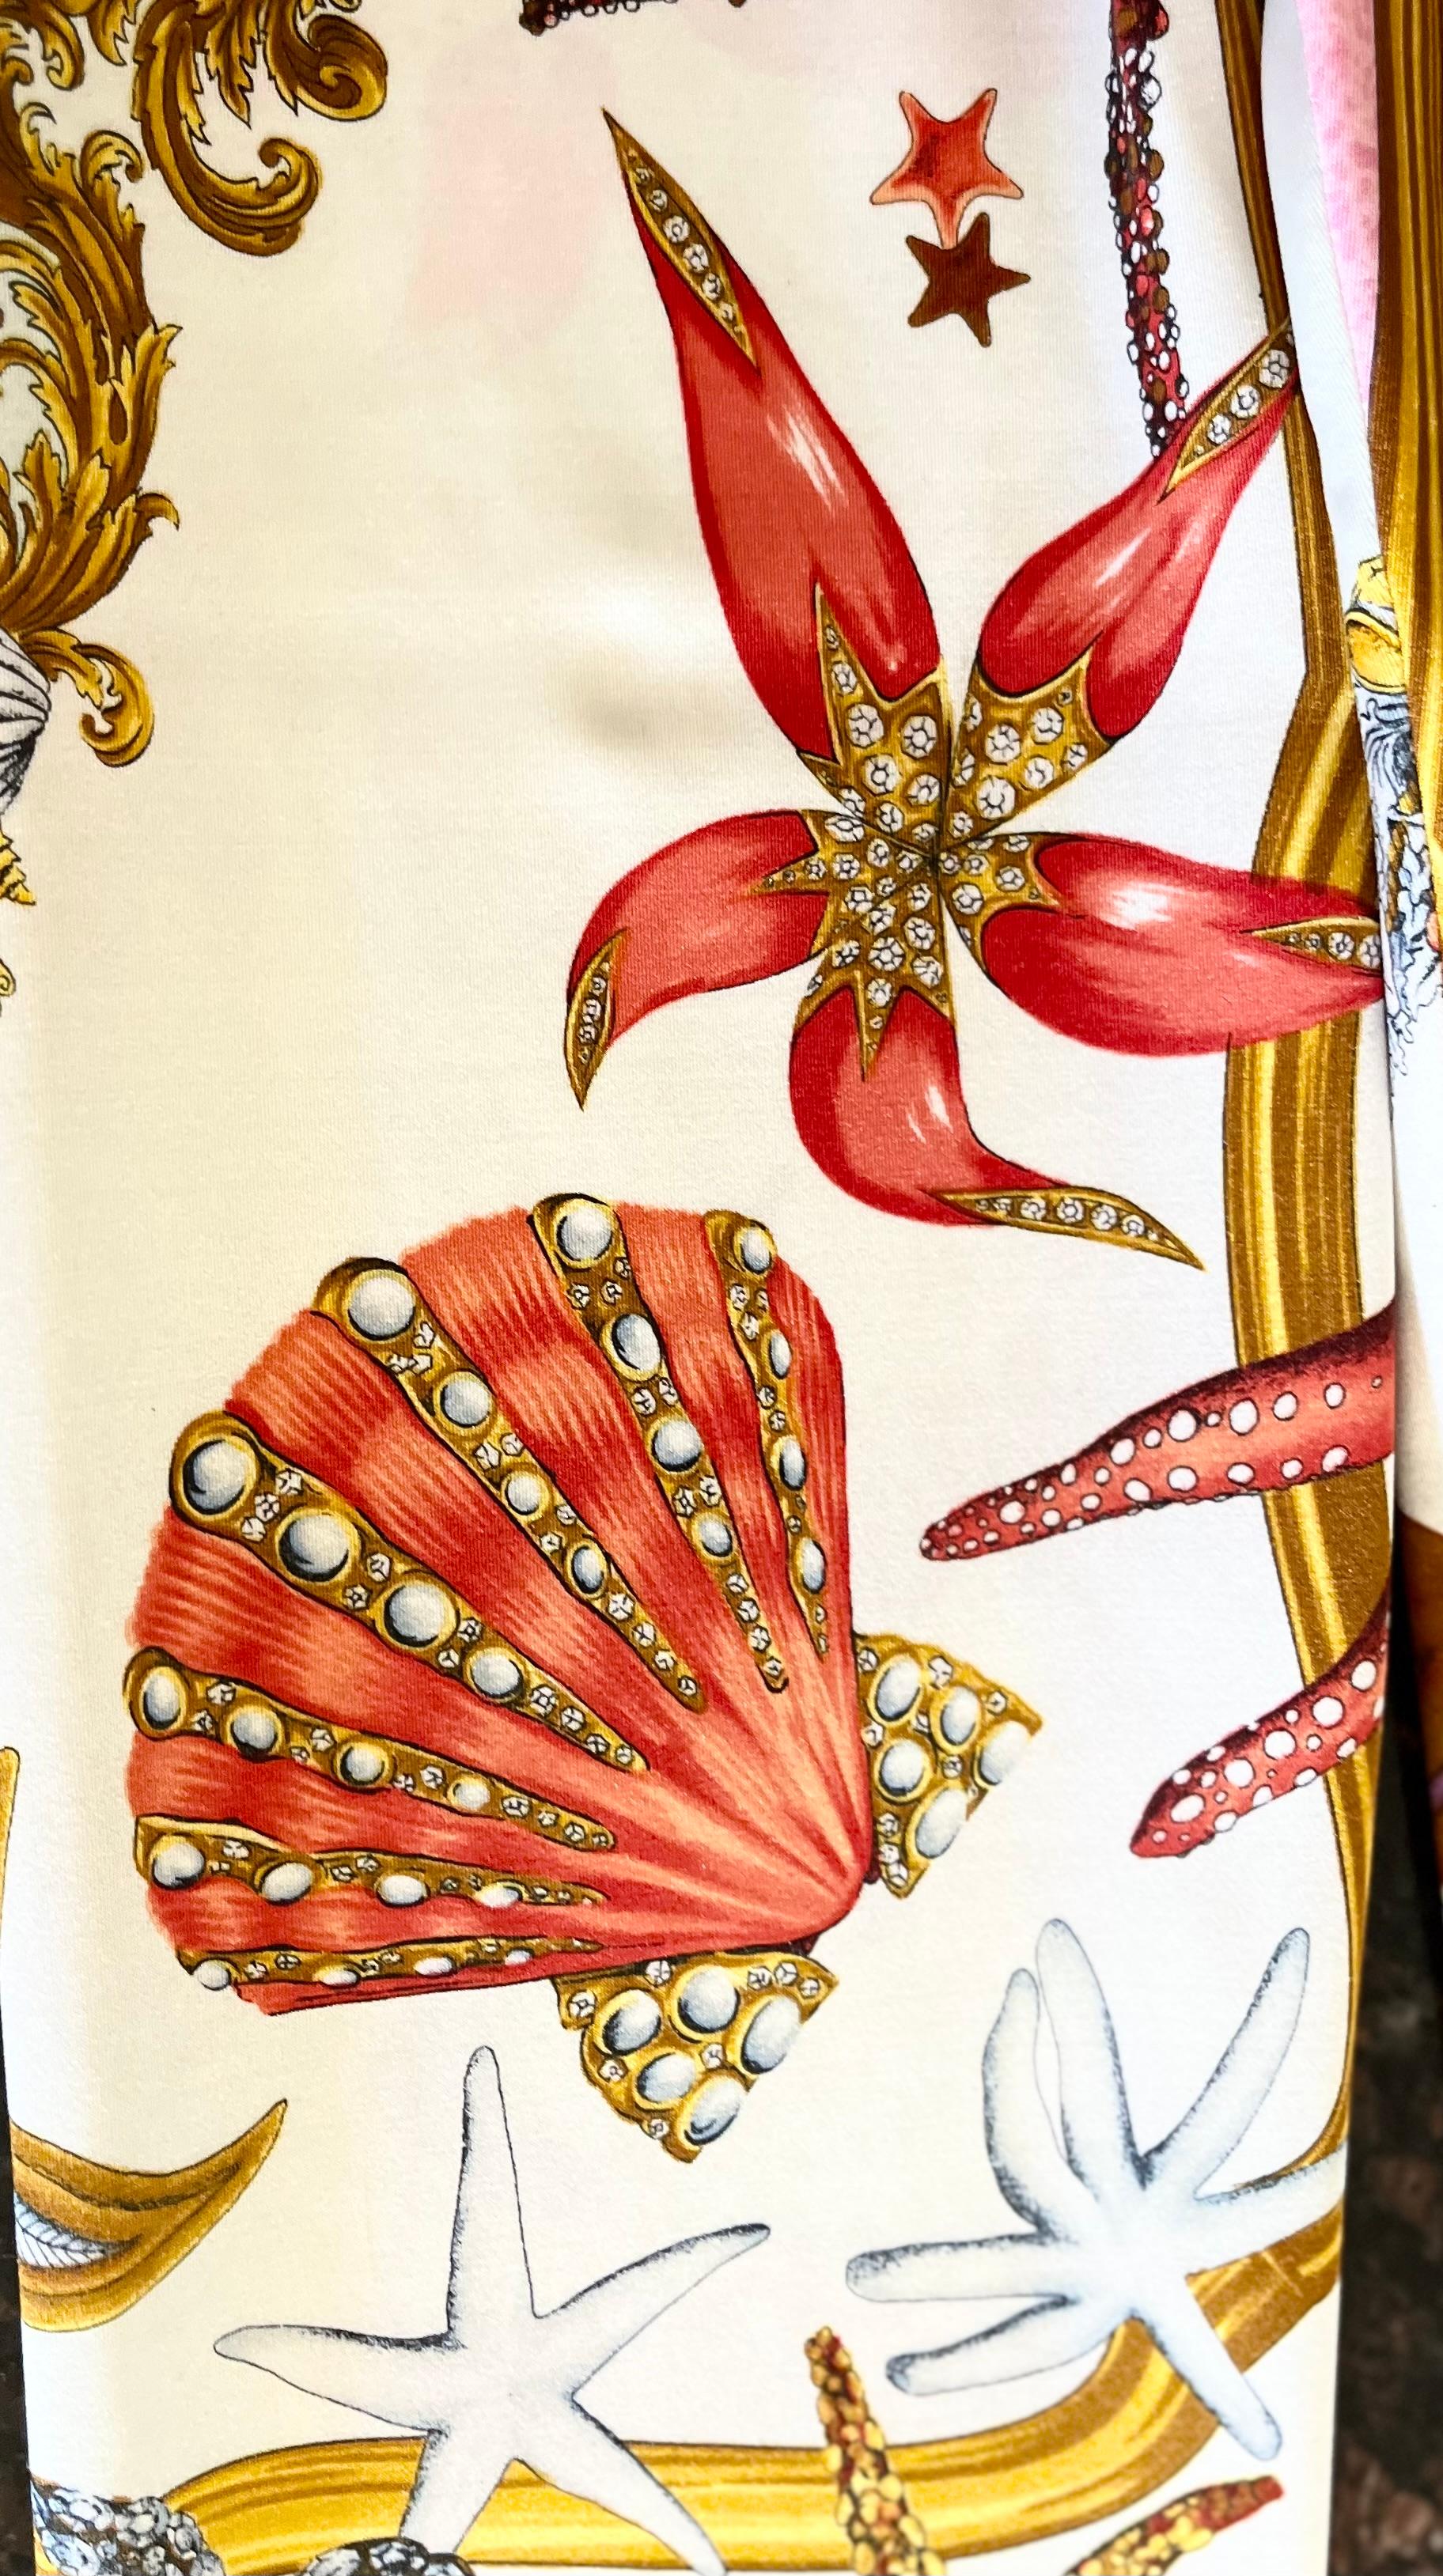 SEASHELL LEGGINGS from MIAMI MANSION GIANNI VERSACE PERSONAL COLLECTION For Sale 2